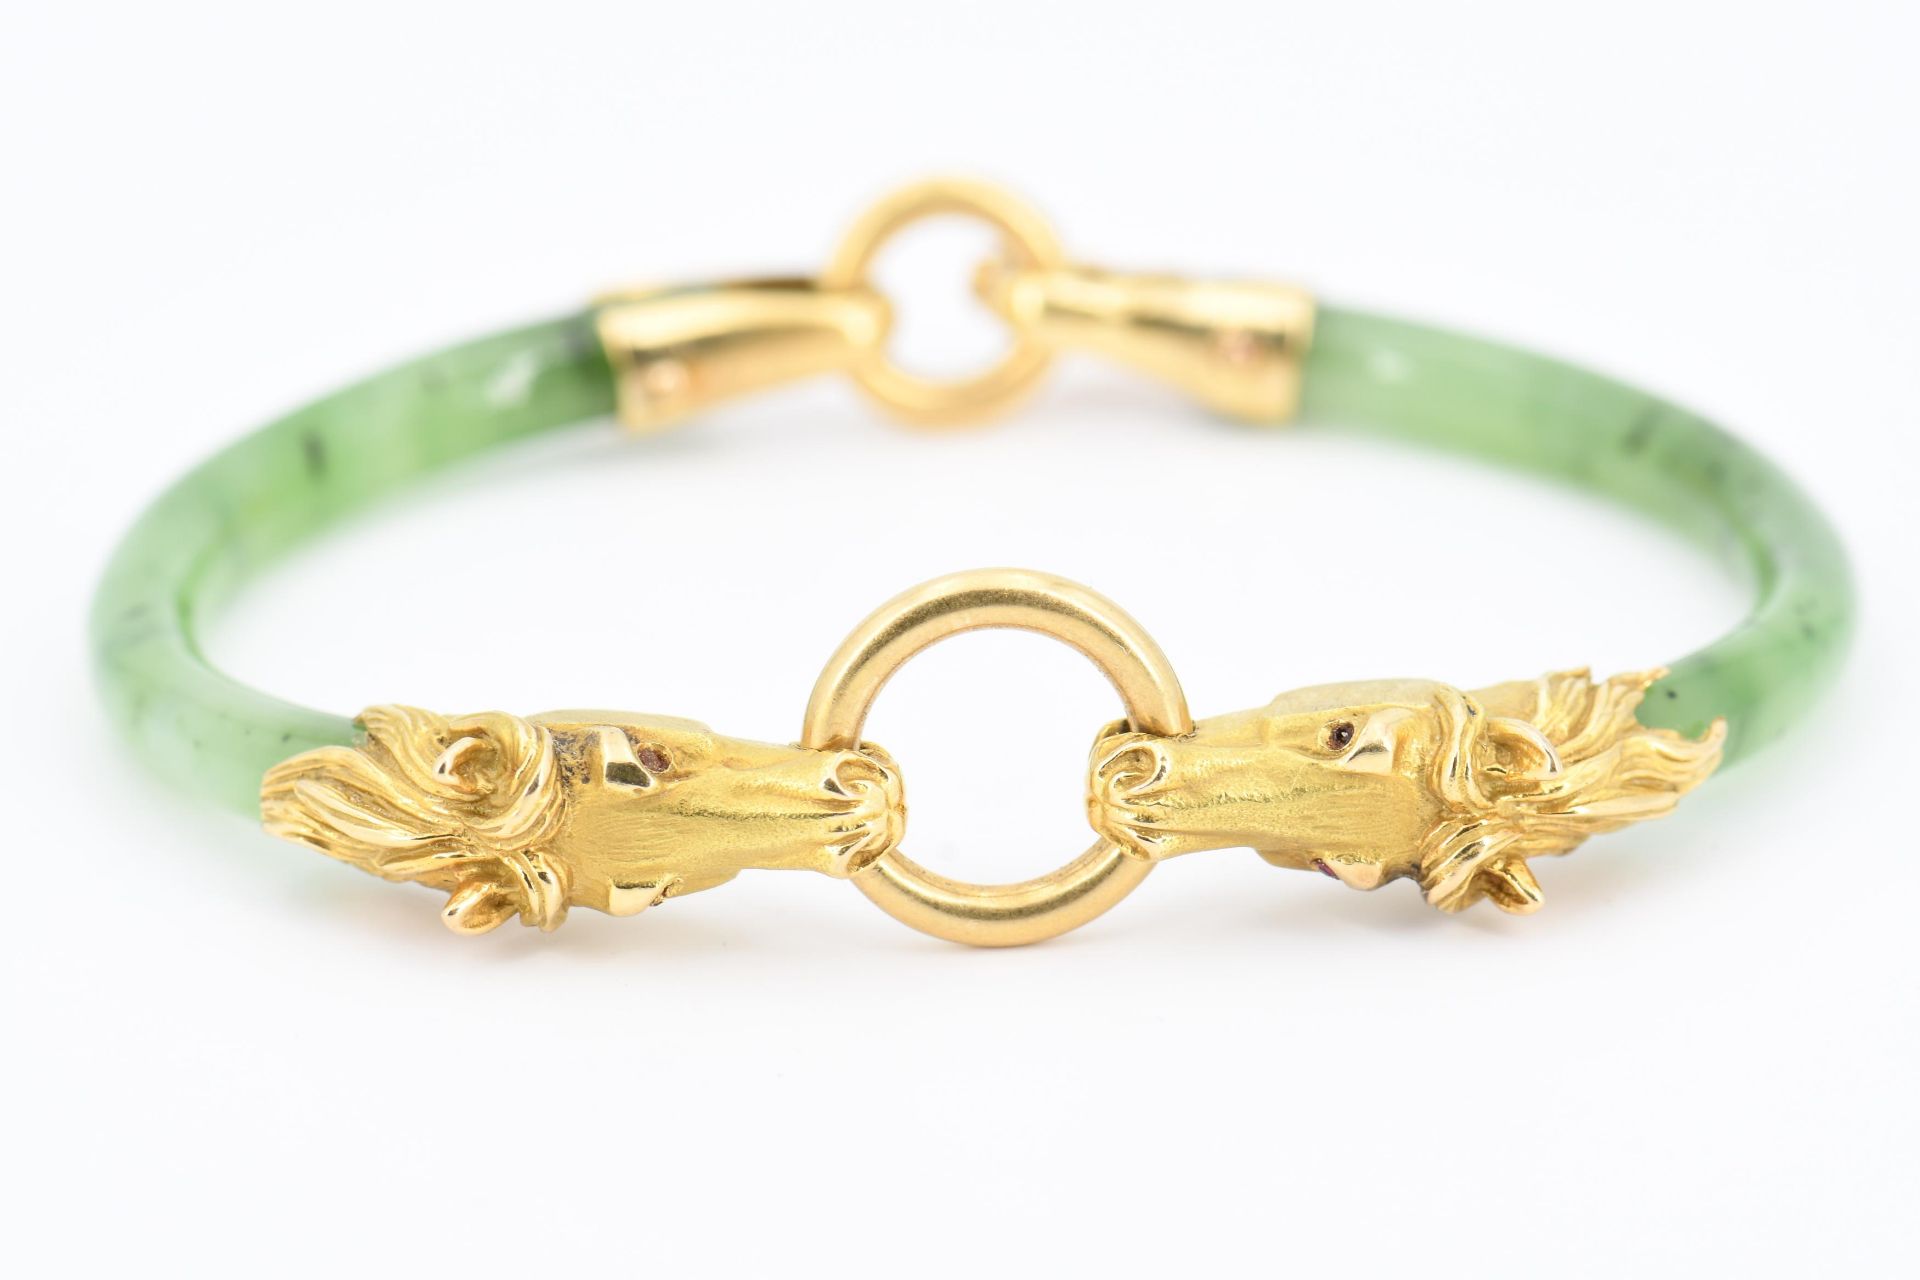 Jade-Bangle with Horse Motif - Image 2 of 6